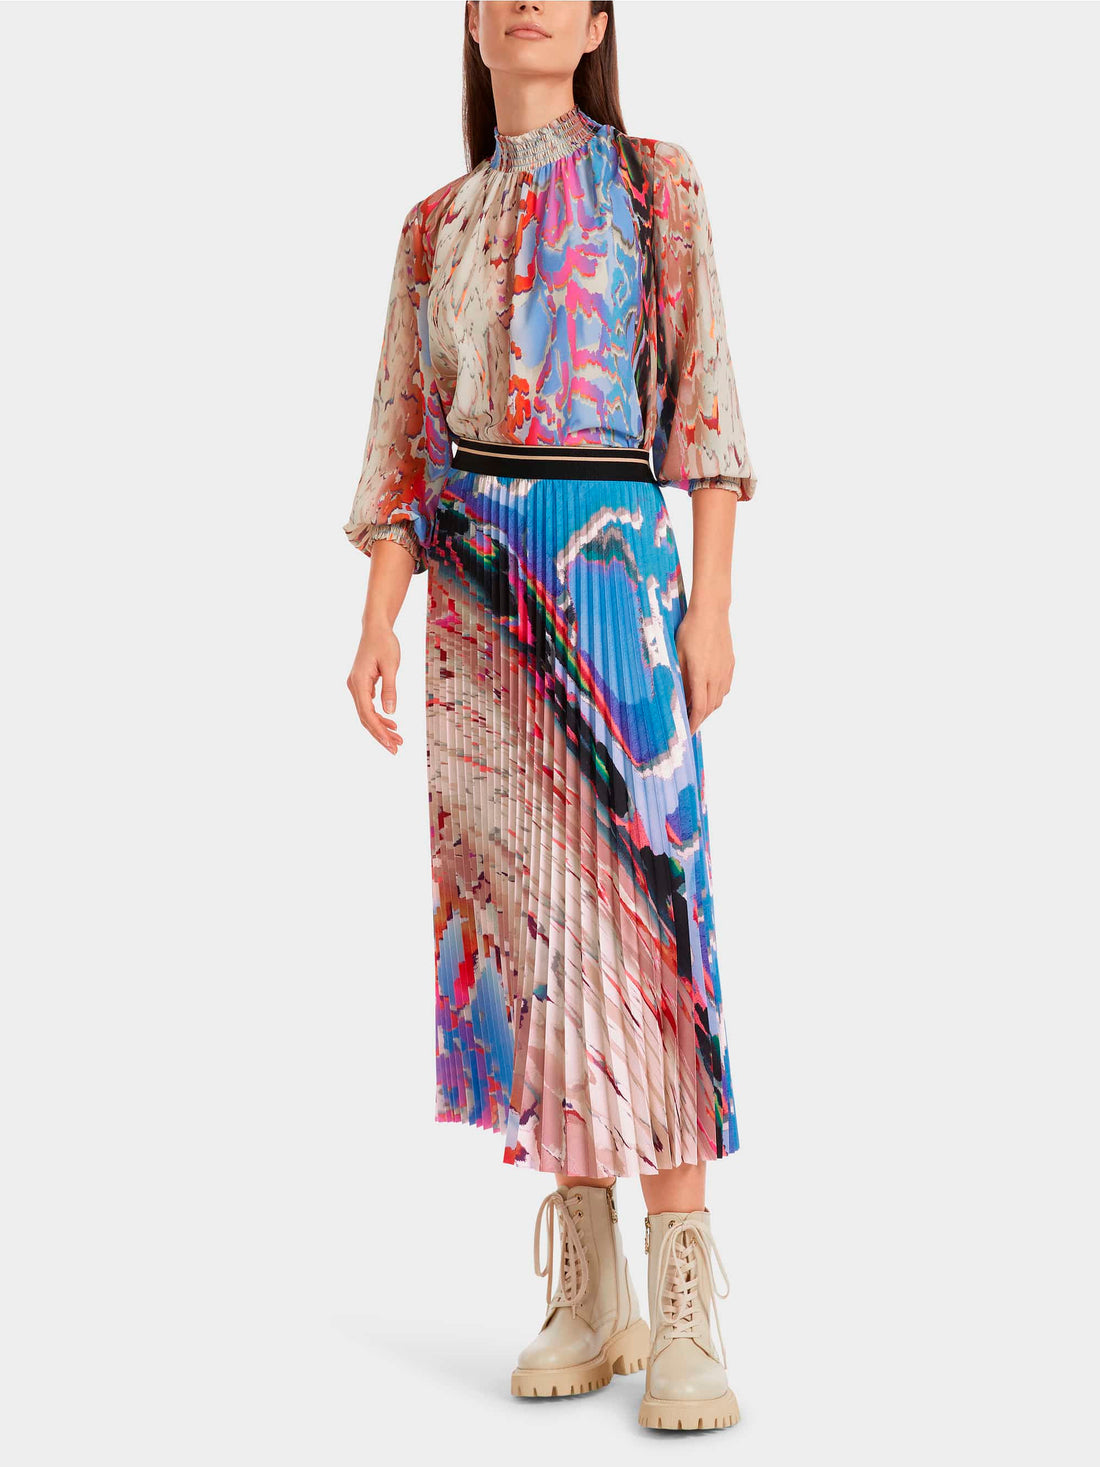 Colourful Printed Pleated Skirt_VC 71.04 W43_321_01